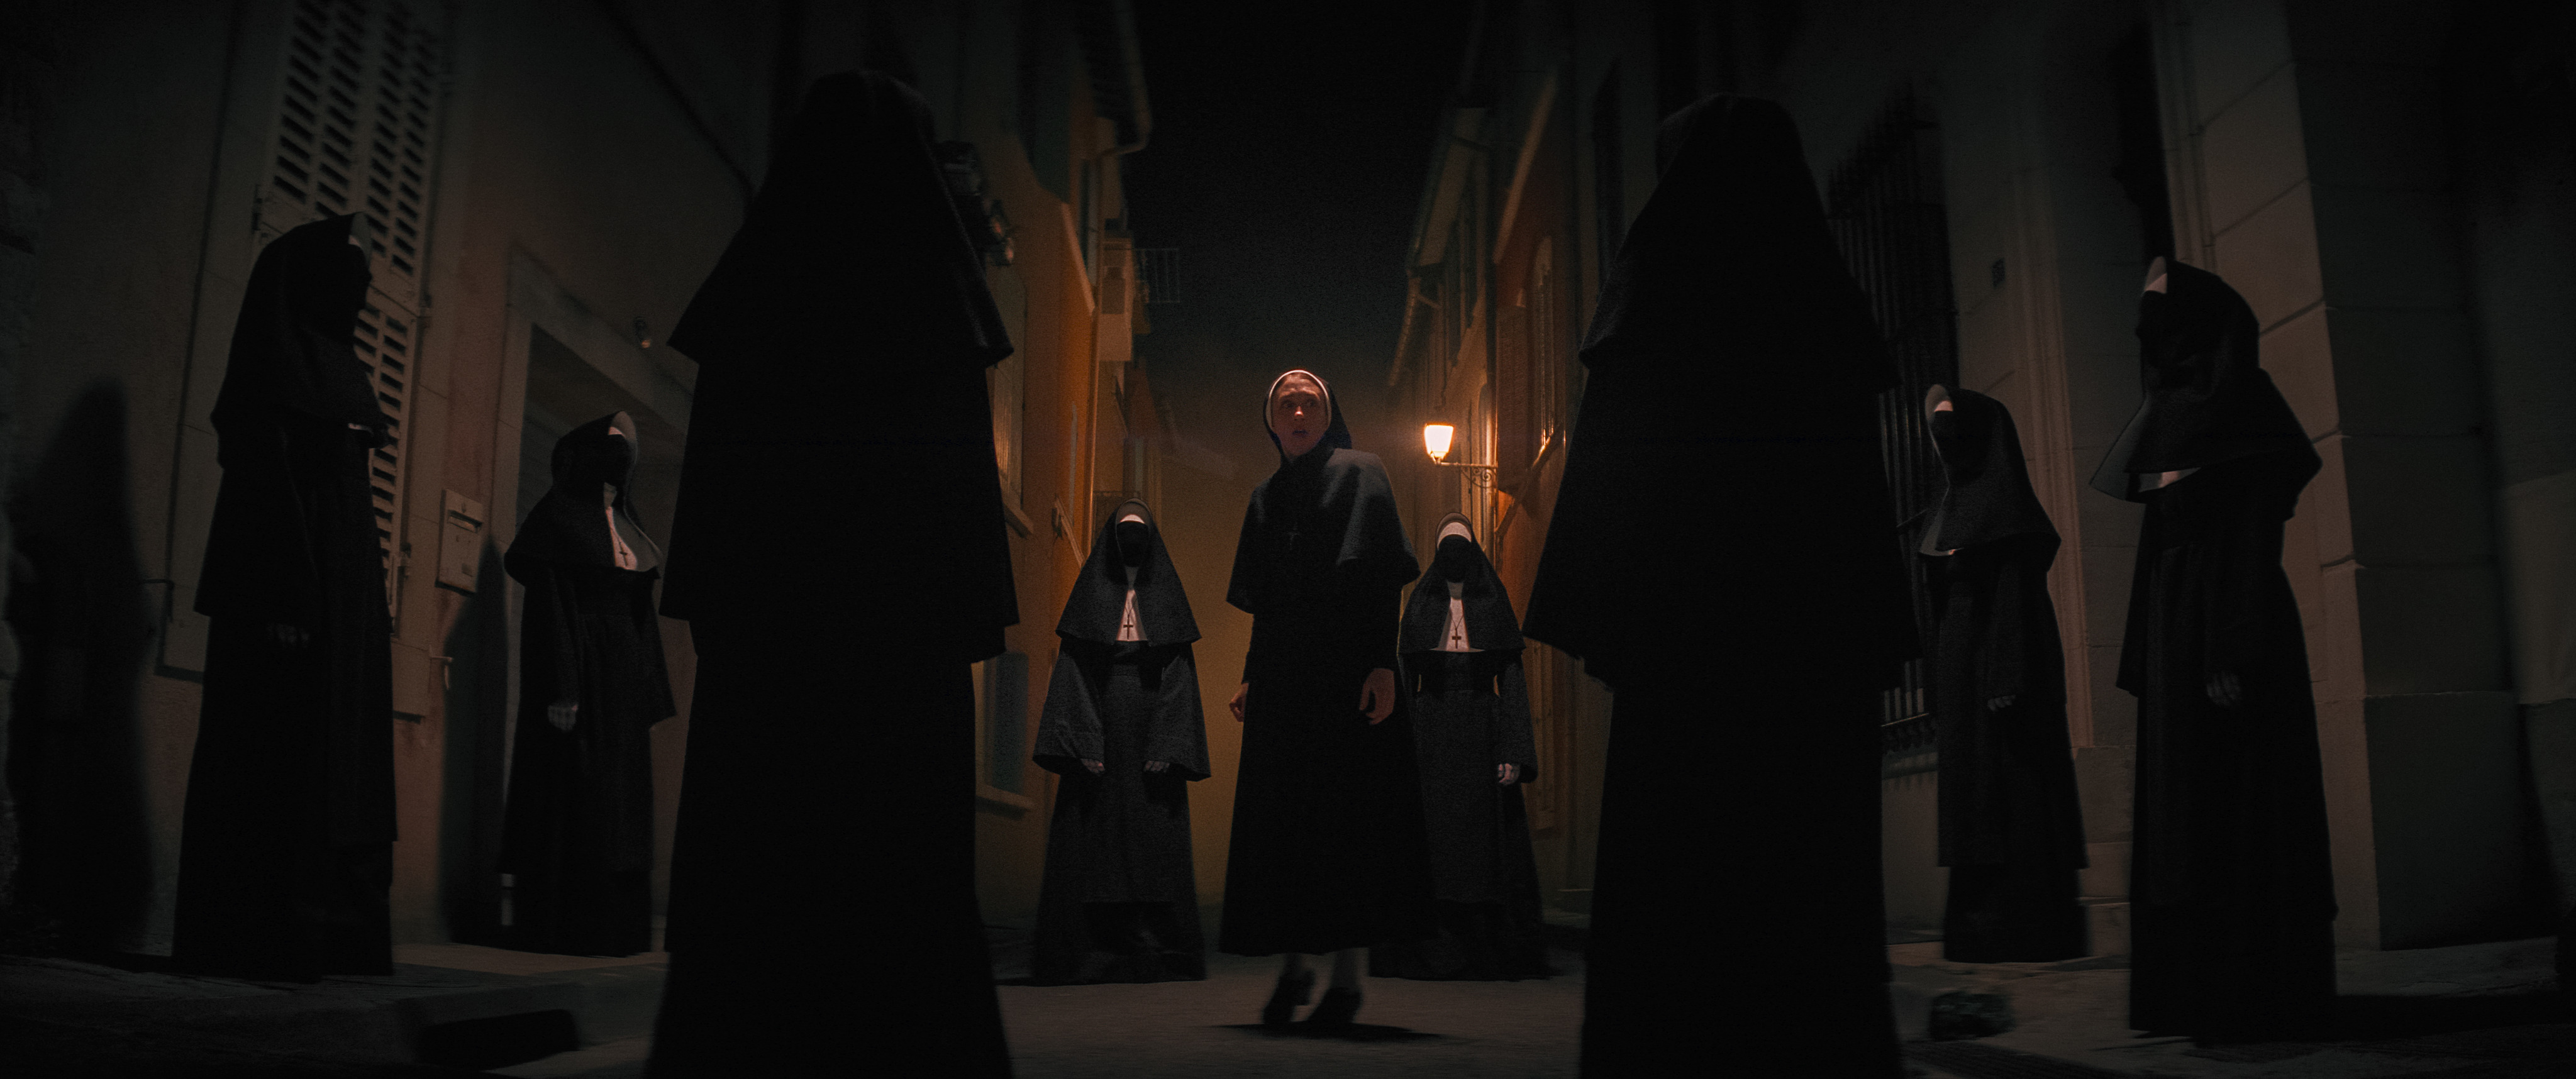 The Nun II Review: Marilyn Manson-Lookalike Demon Returns In Adequate But  Not-So-Scary Sequel - 8days